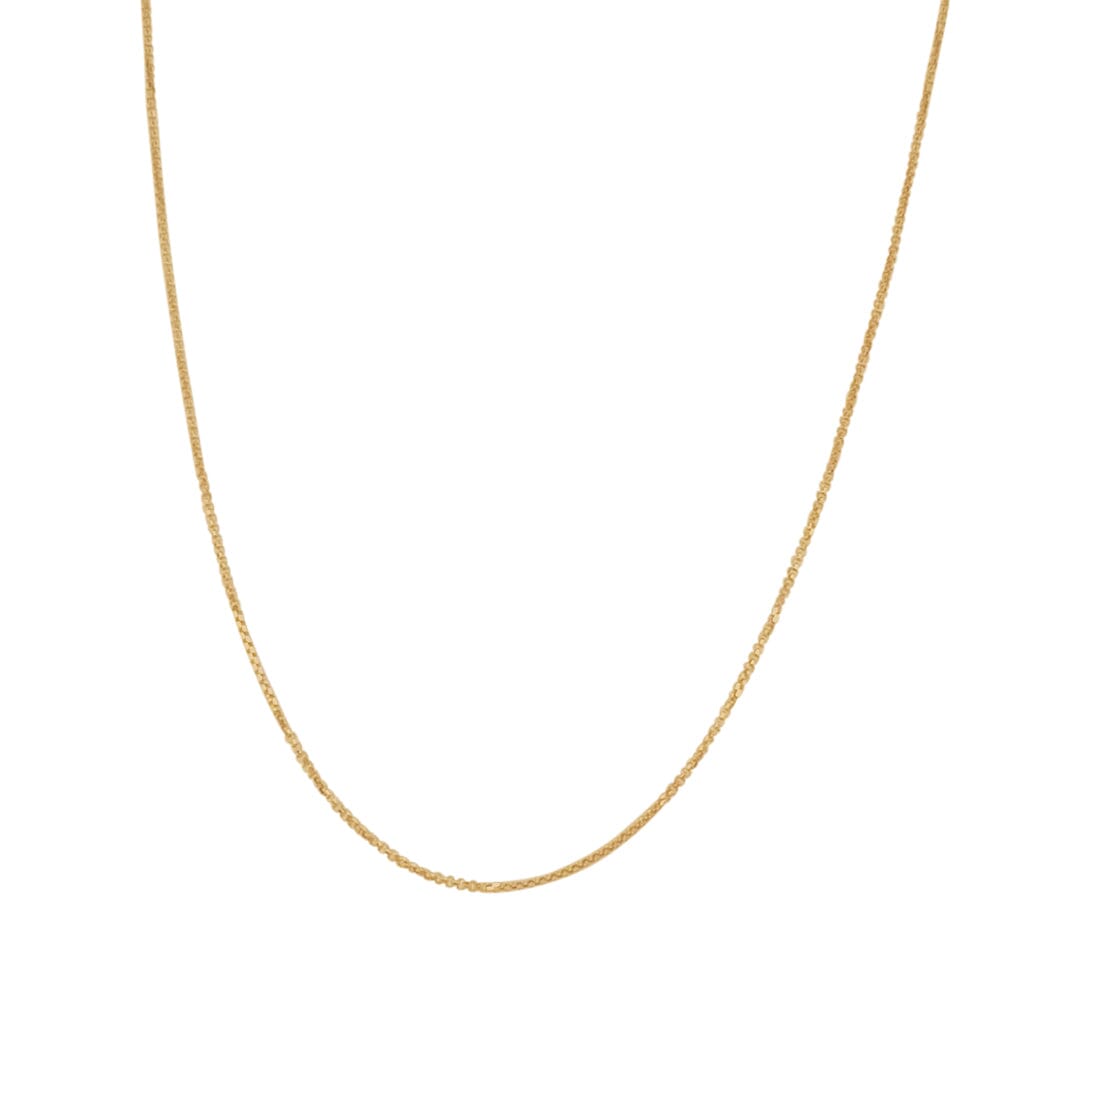 50cm Round Box Necklace in 9ct Yellow Gold Necklaces Bevilles 